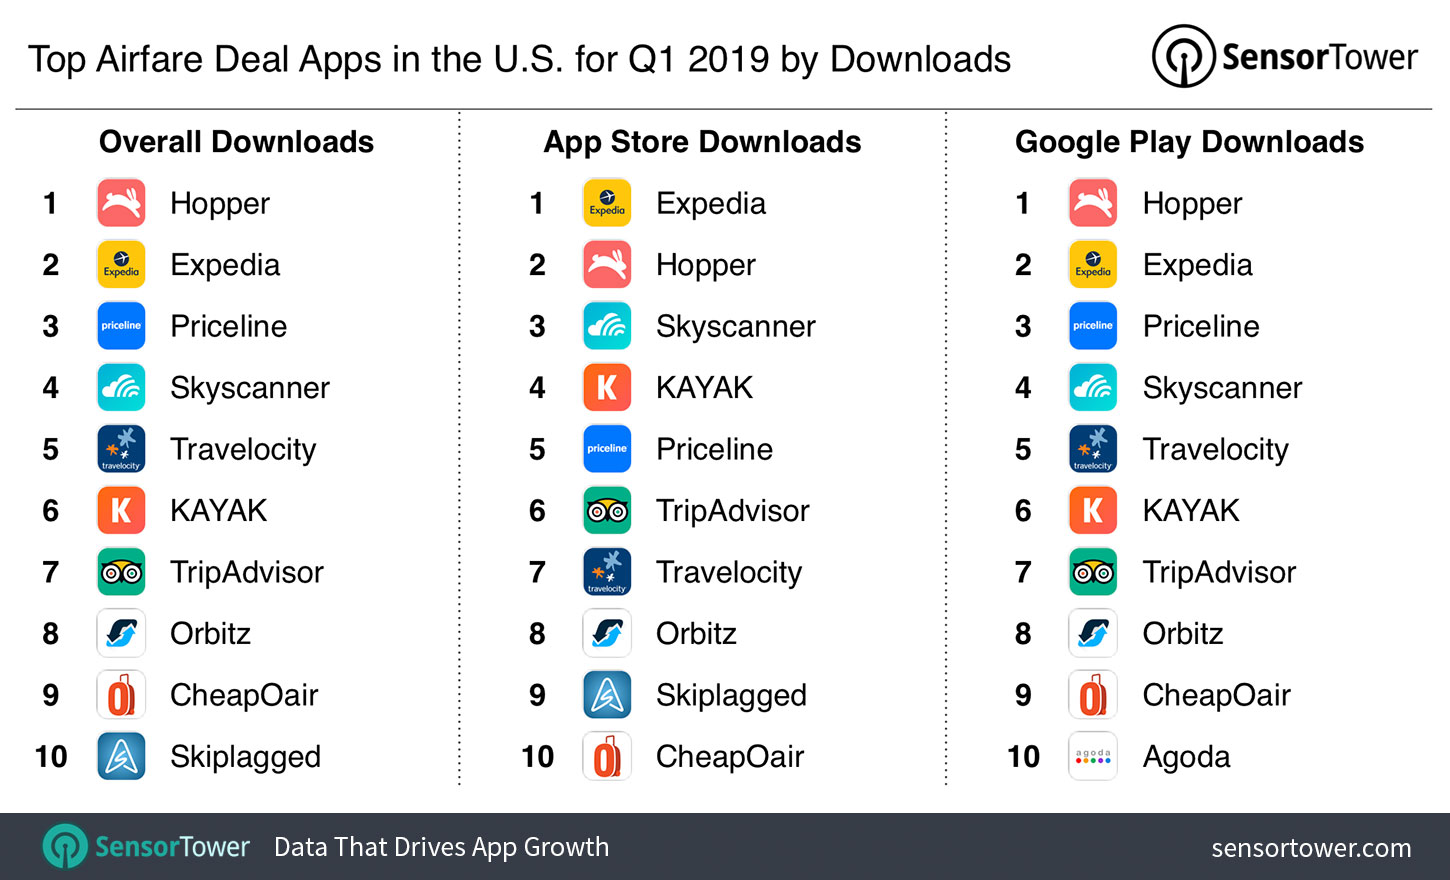 Top Airfare Deal Apps in the U.S. for Q1 2019